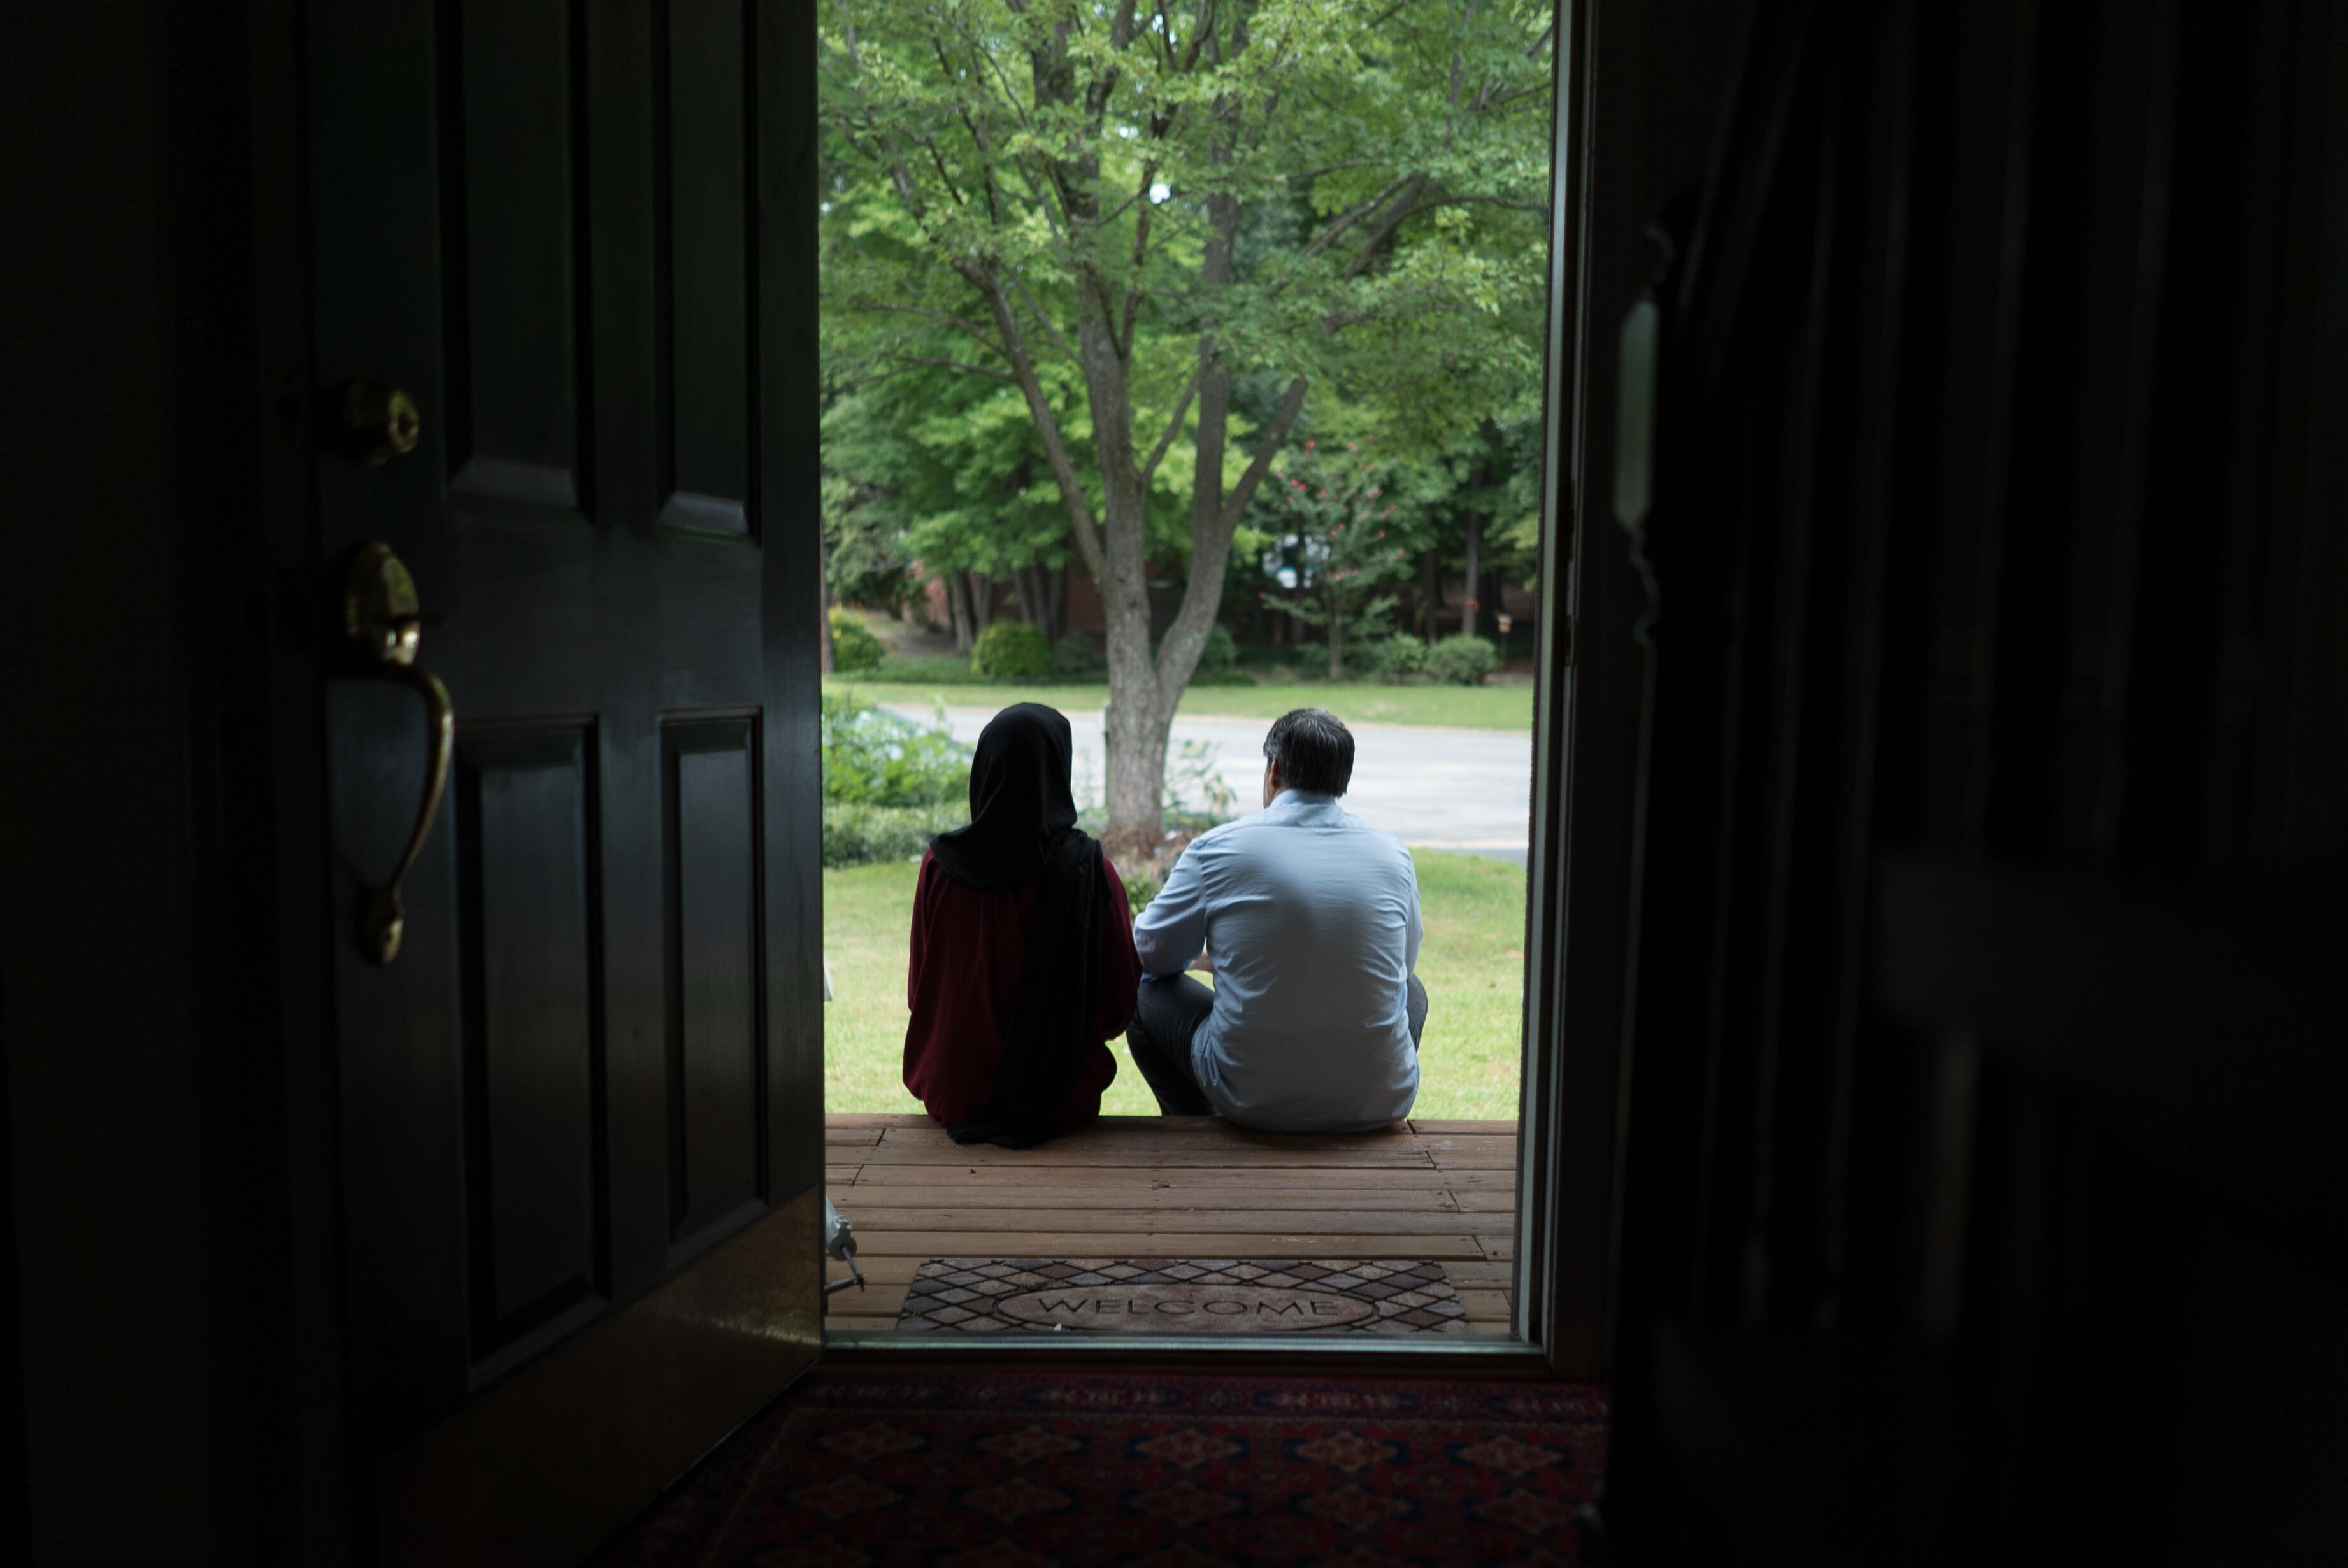 Afghan refugees Fatima, 19, and her father Abdul, 52, sit on the wooden front steps of their Virginia home looking out at the garden